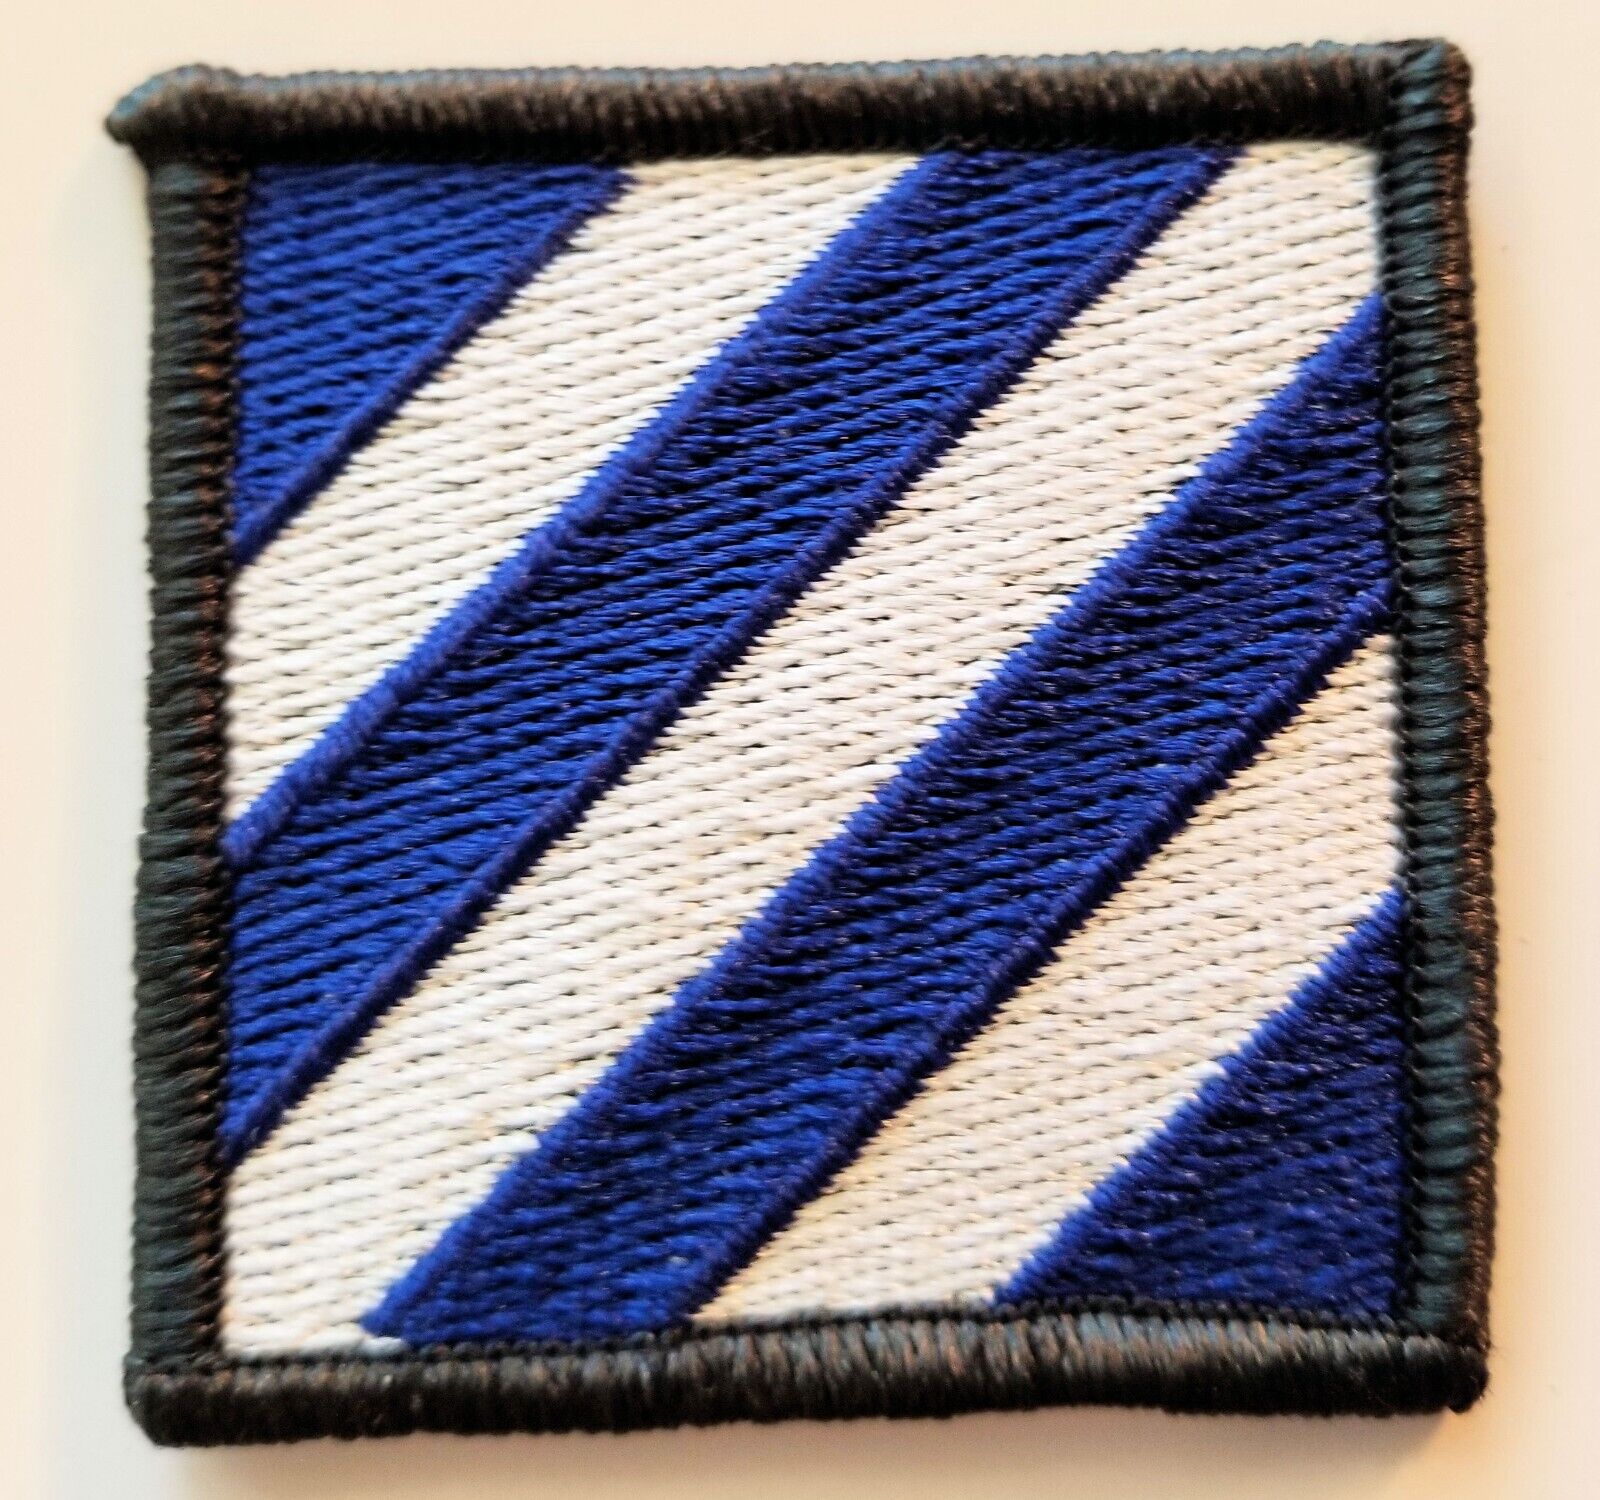 US ARMY 3RD INFANTRY DIVISION ROCK OF THE MARNE US GOVERNMENT ISSUE USGI PATCH